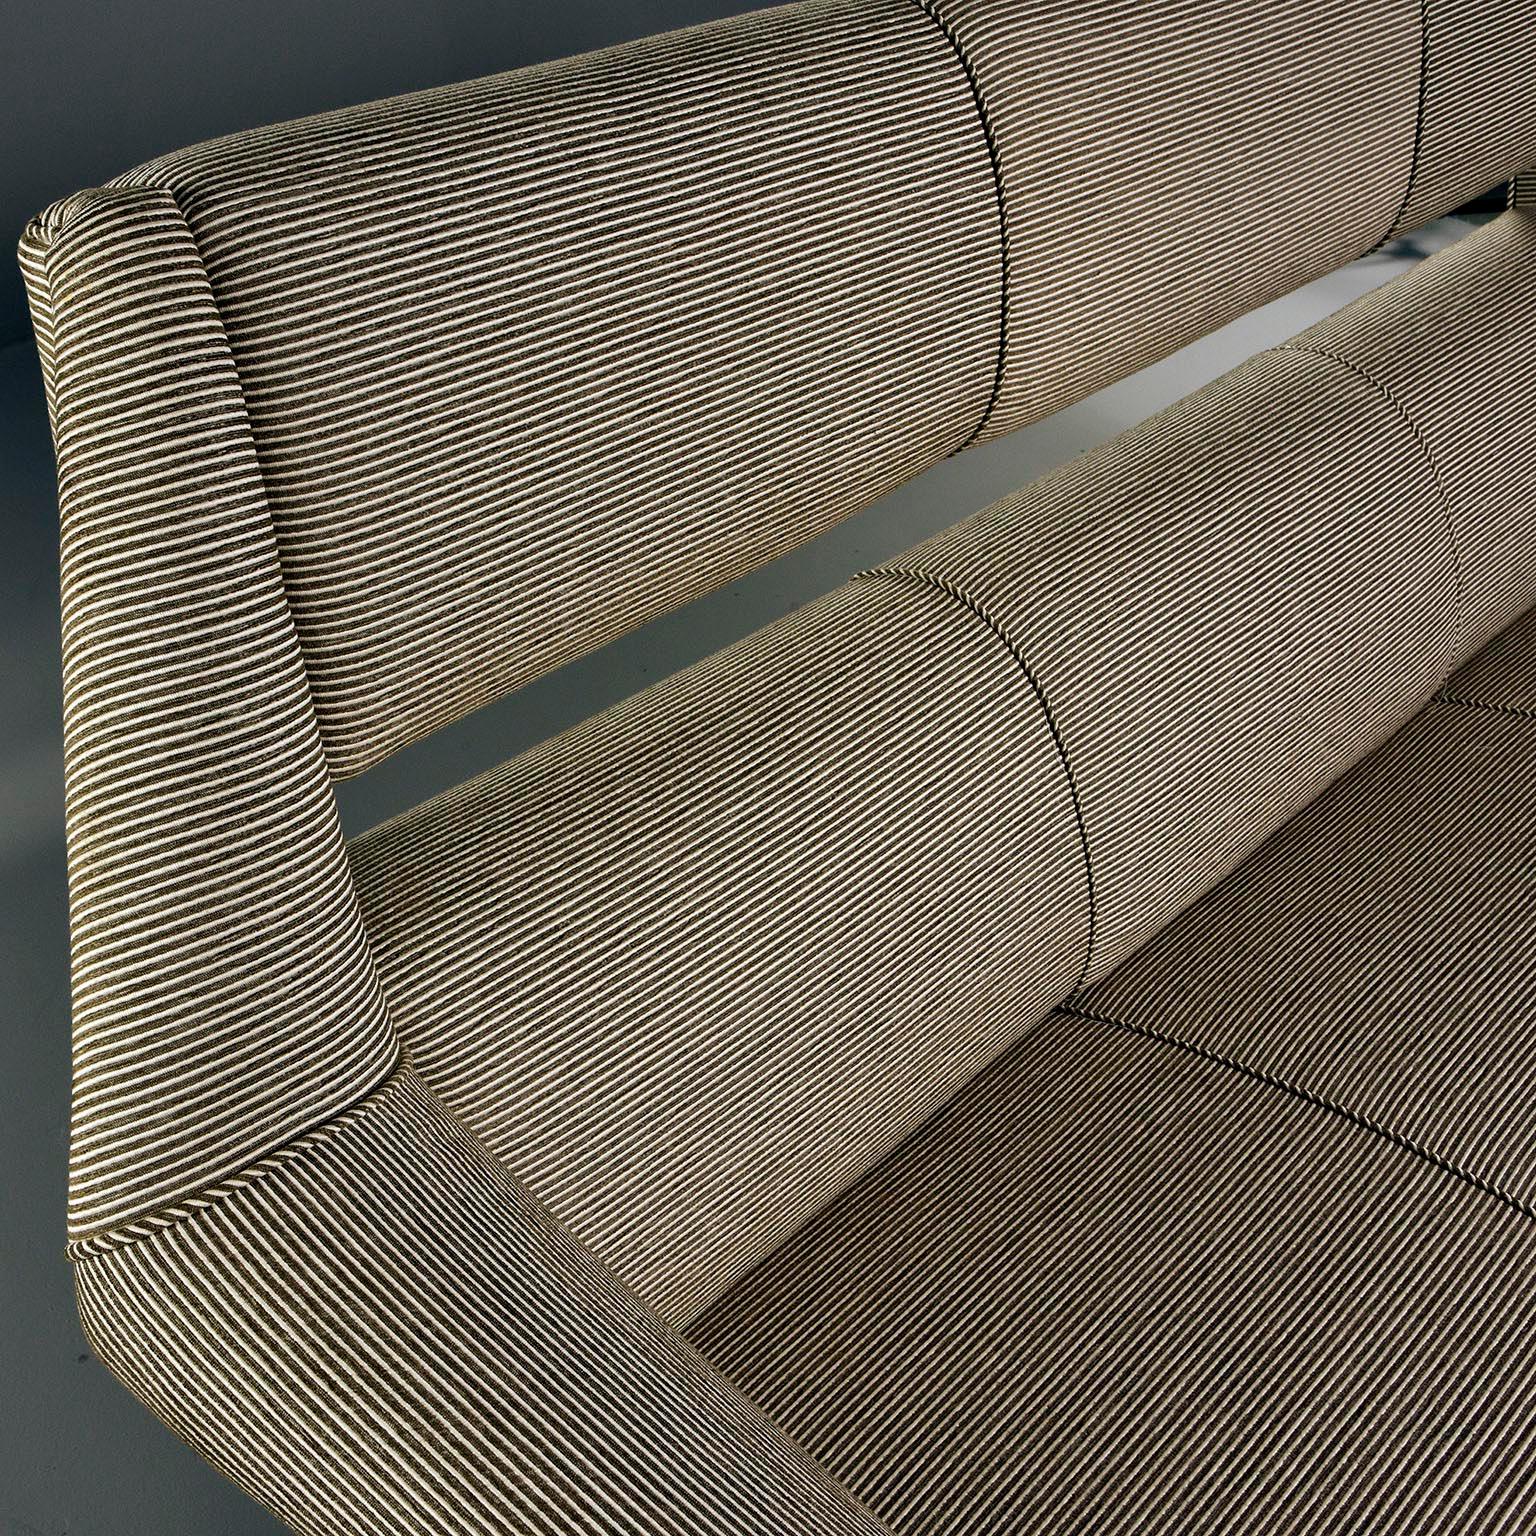 Metal Newly Upholstered Midcentury Settee or Sofa by Gigi Radice for Minotti